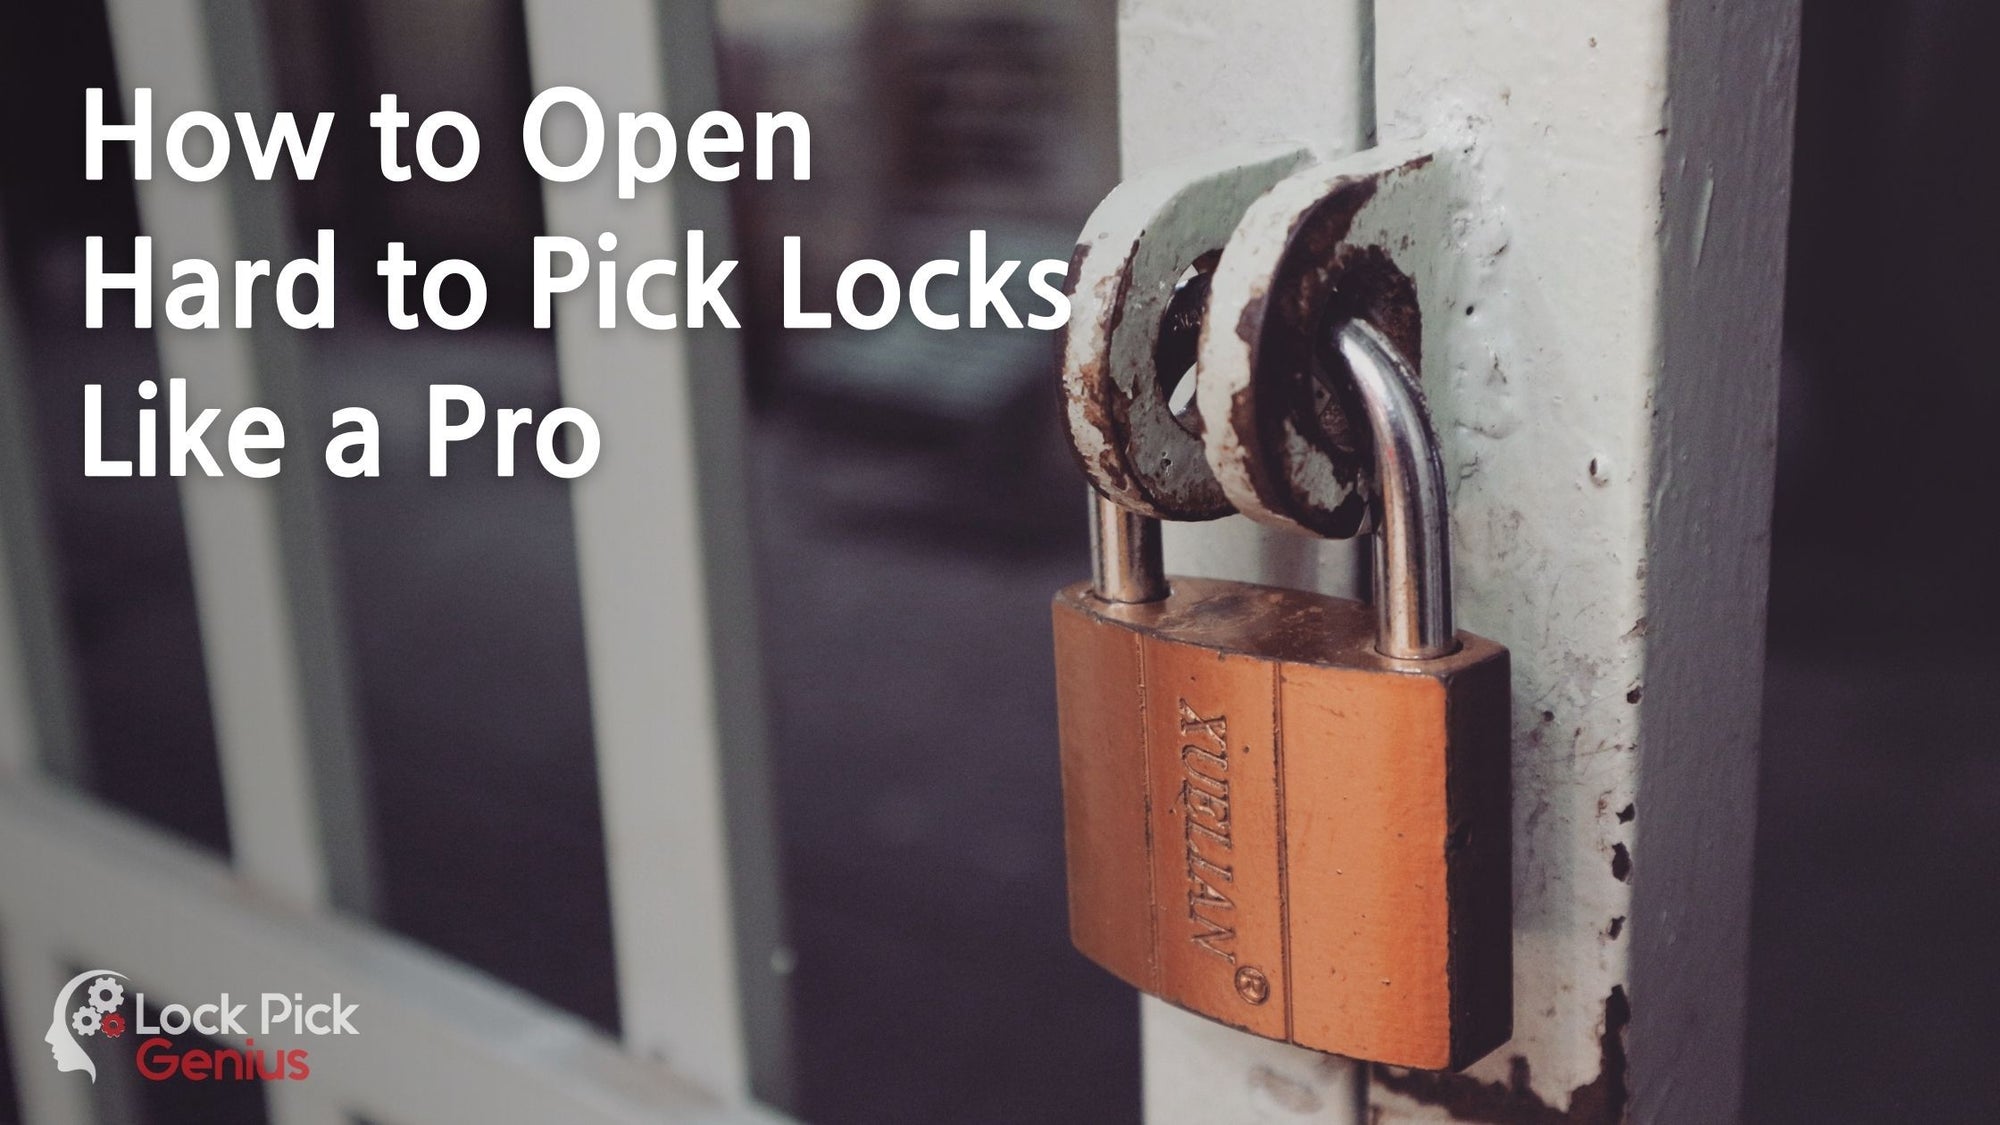 How to Open Hard to Pick Locks Like a Pro